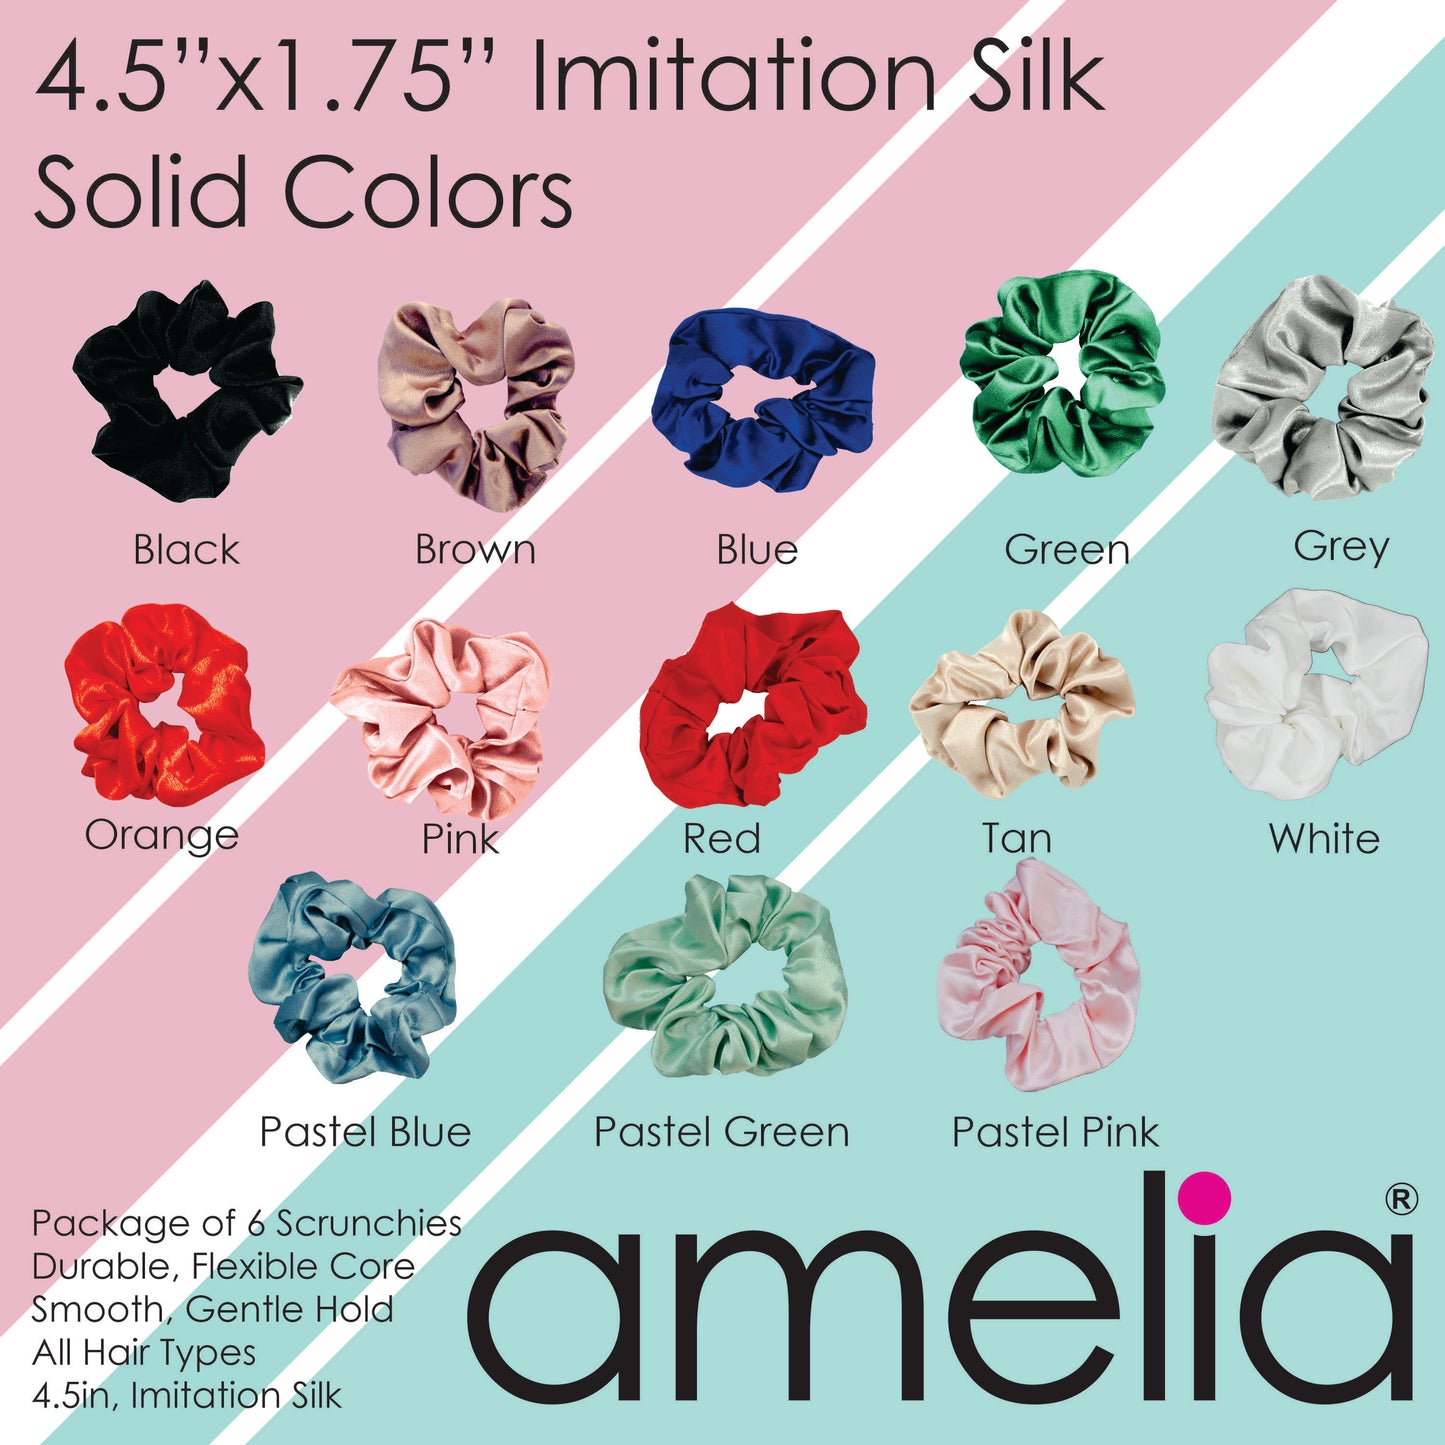 Amelia Beauty, Earth Tones Imitation Silk Scrunchies, 4.5in Diameter, Gentle on Hair, Strong Hold, No Snag, No Dents or Creases. 6 Pack